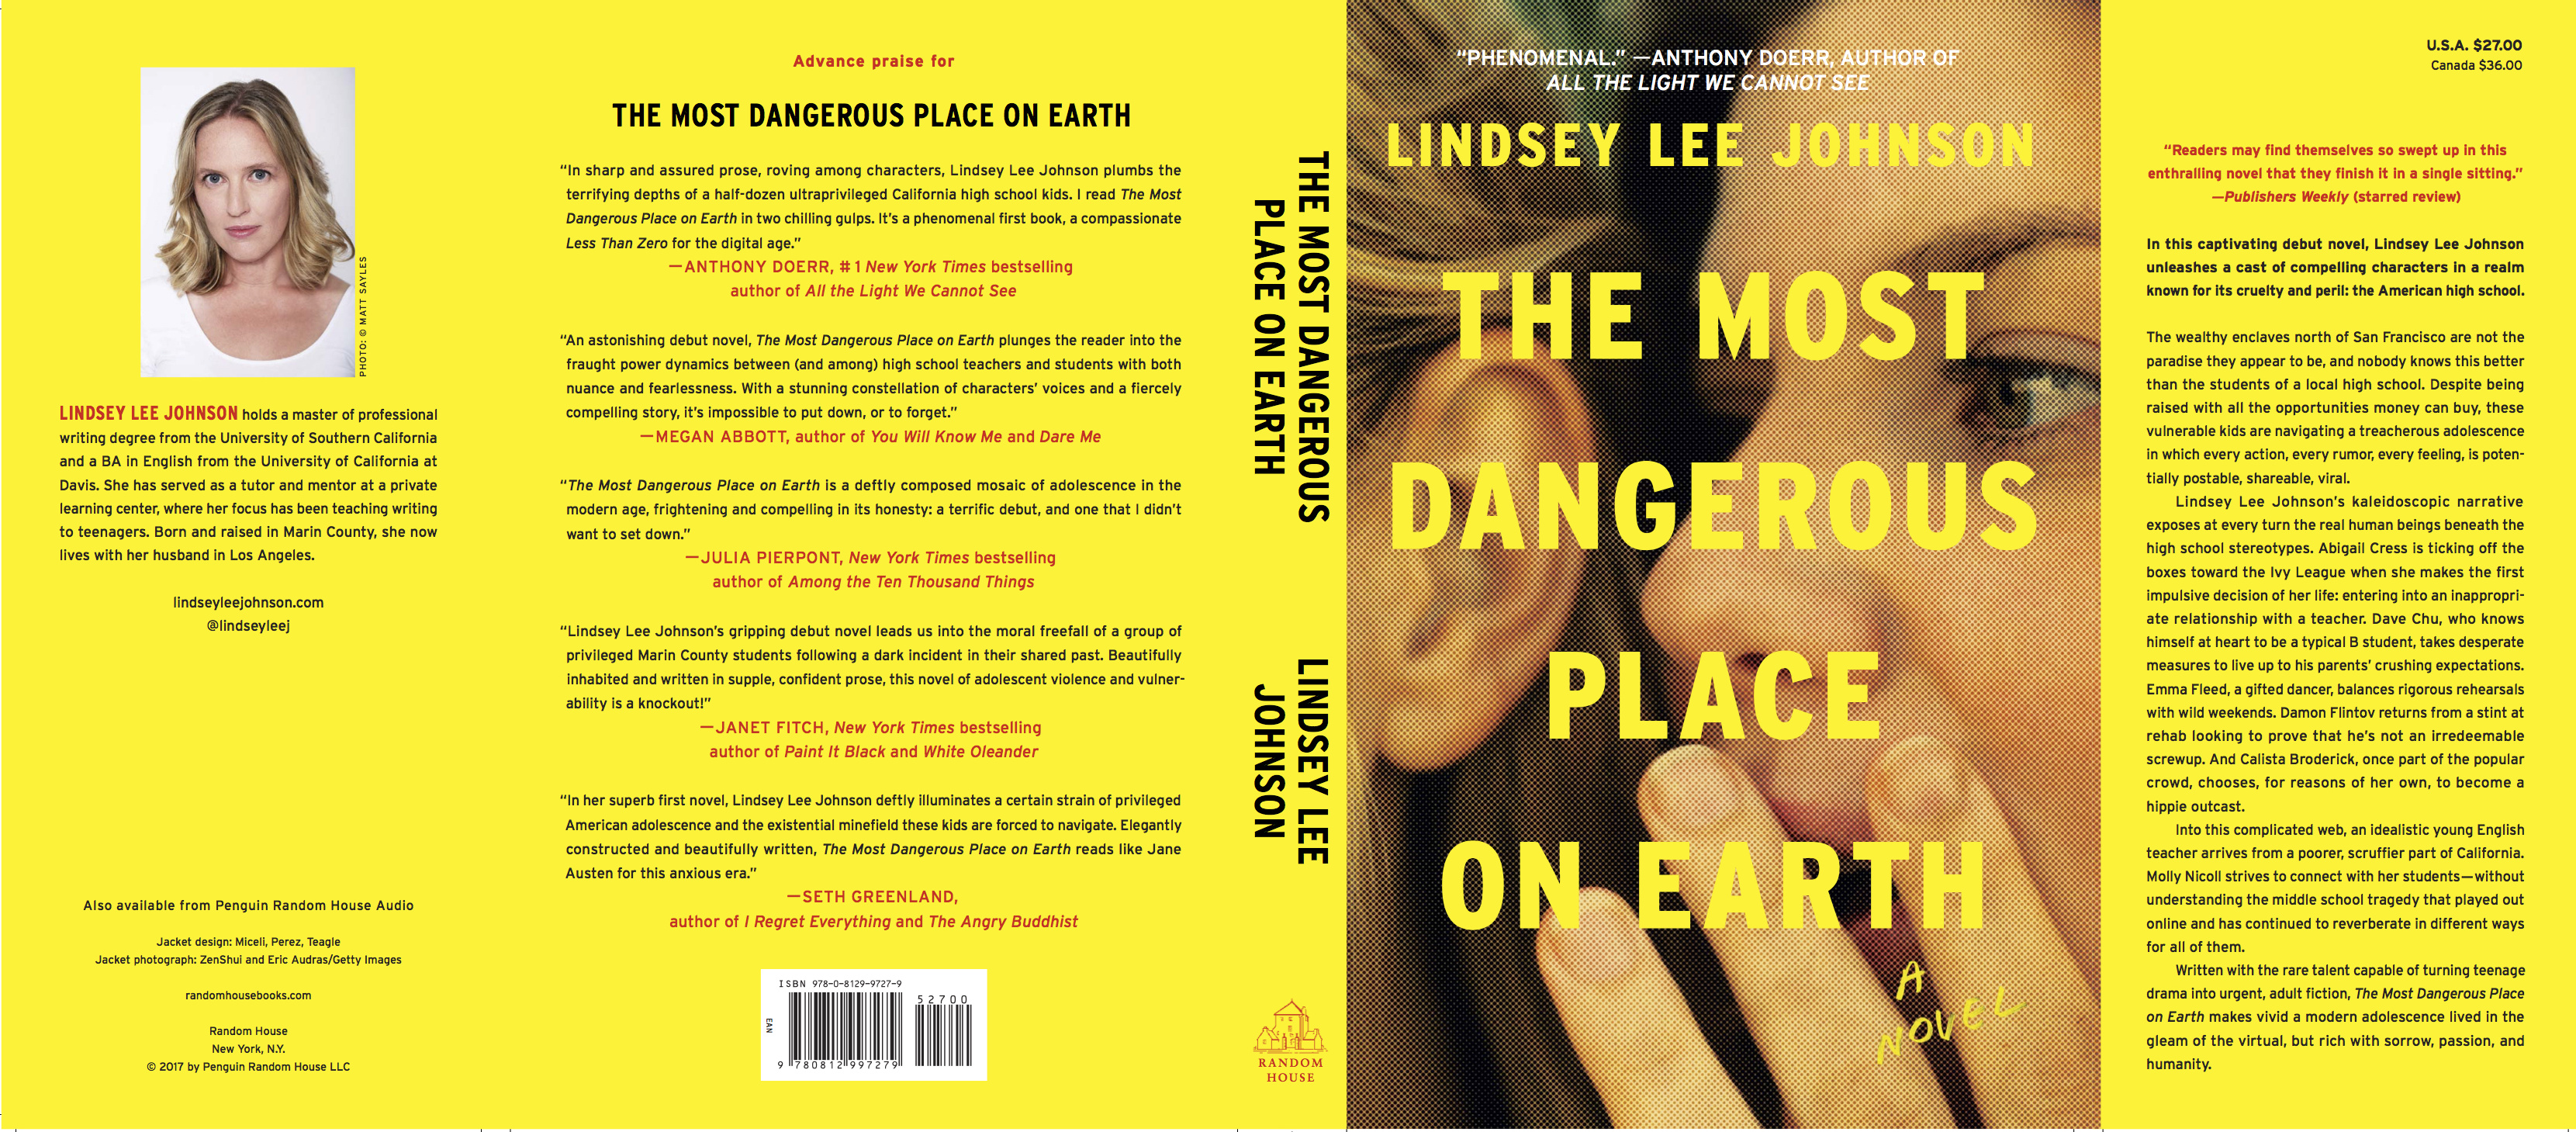 Most Dangerous Place on earth book cover